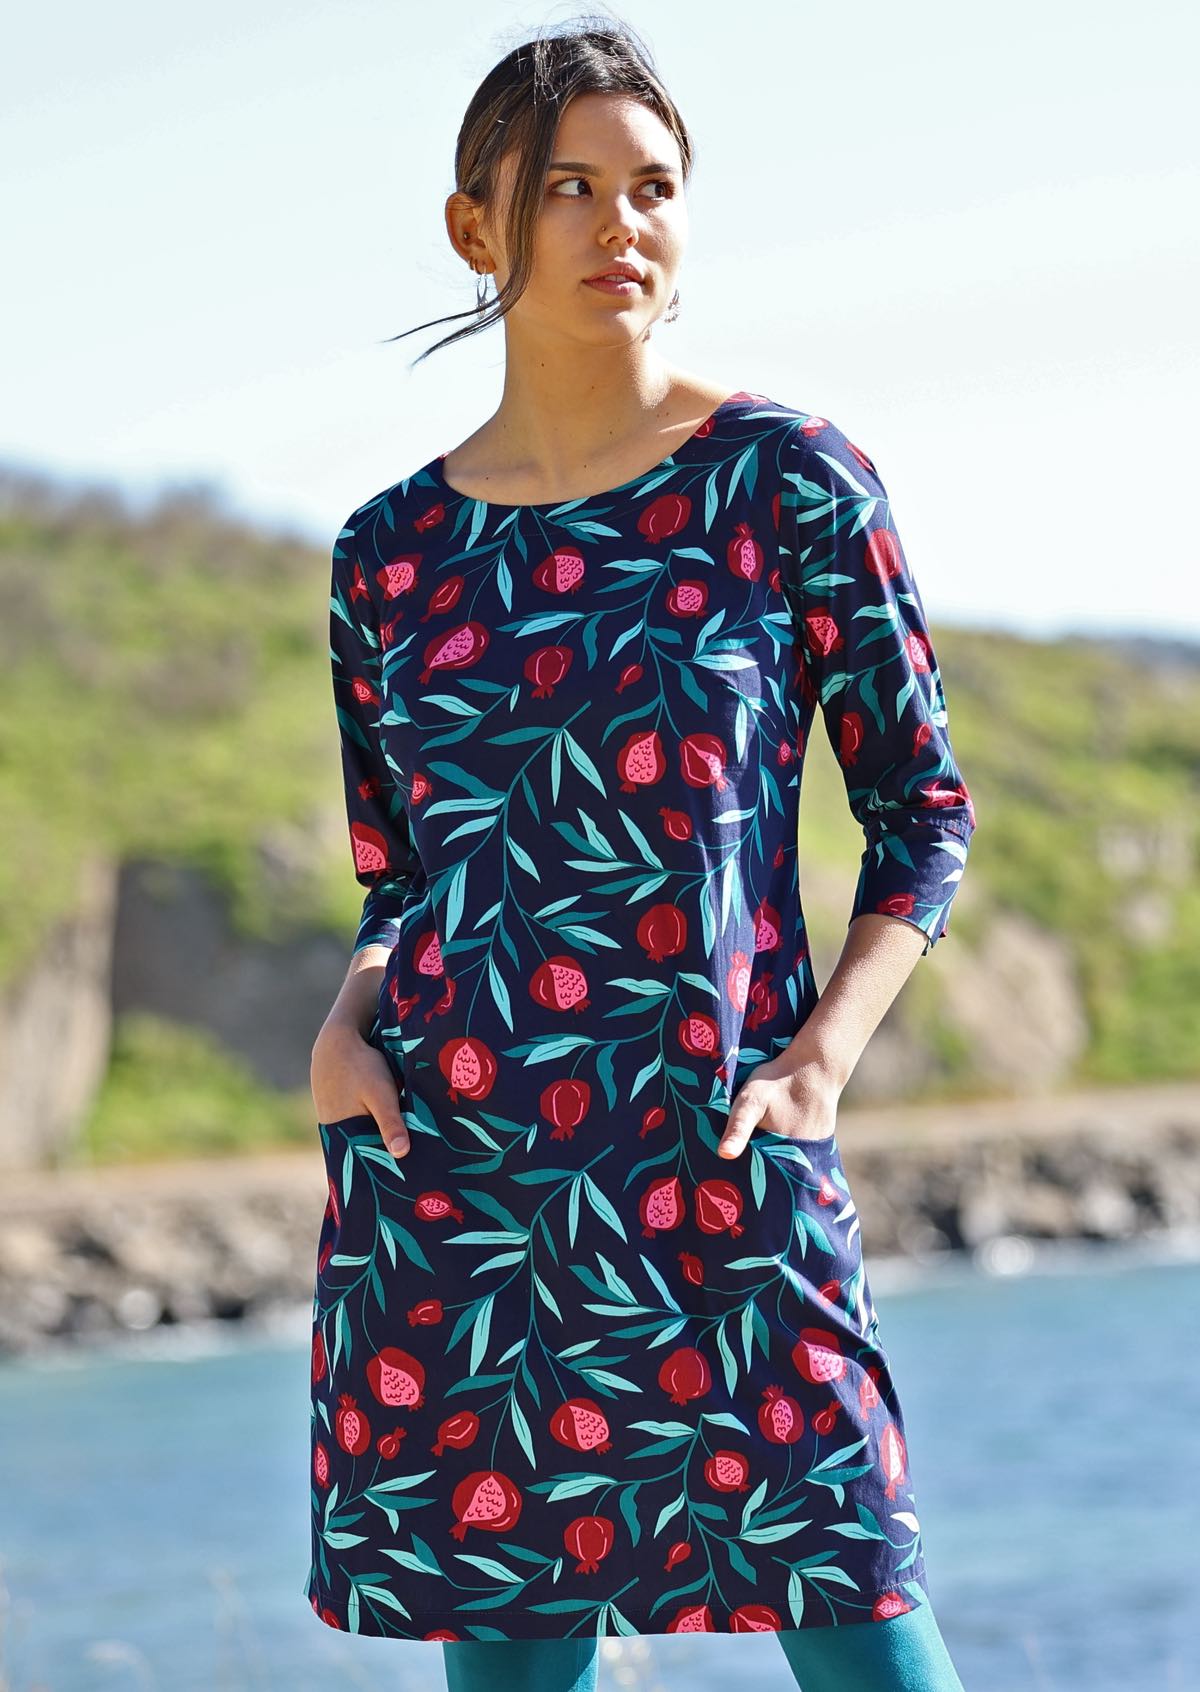 Model wears 100% cotton dress with pink red fruit print on blue base